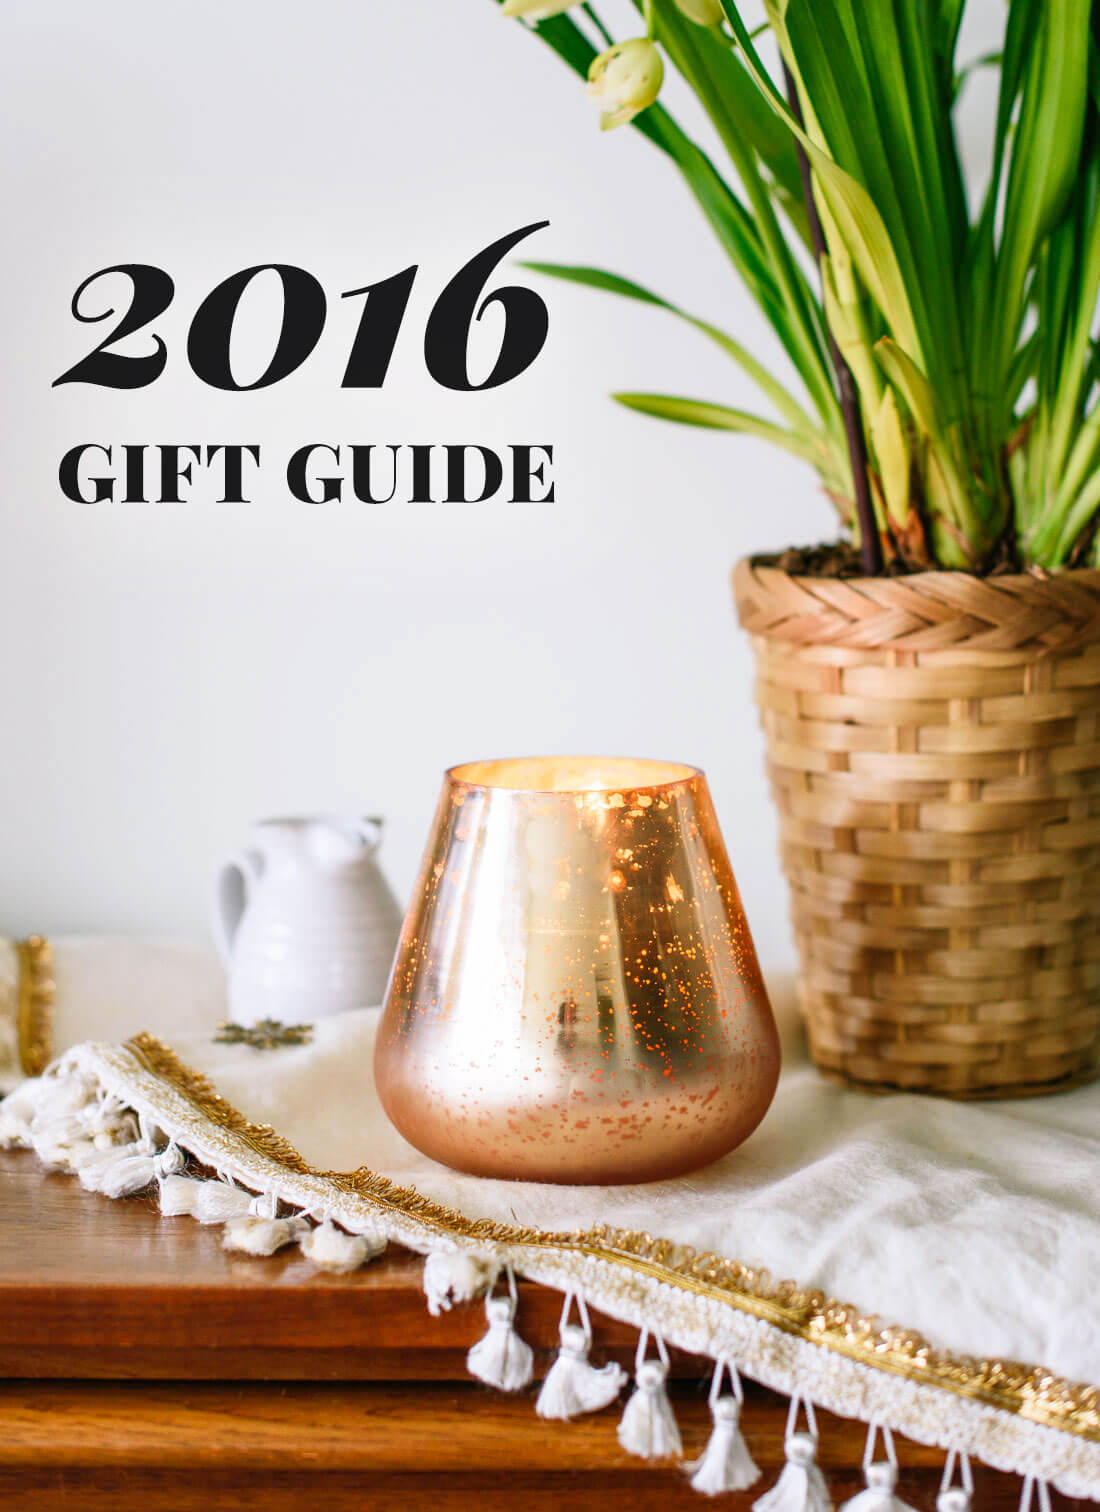 Cookie and Kate's holiday gift guide! Find great last-minute gifts here. cookieandkate.com